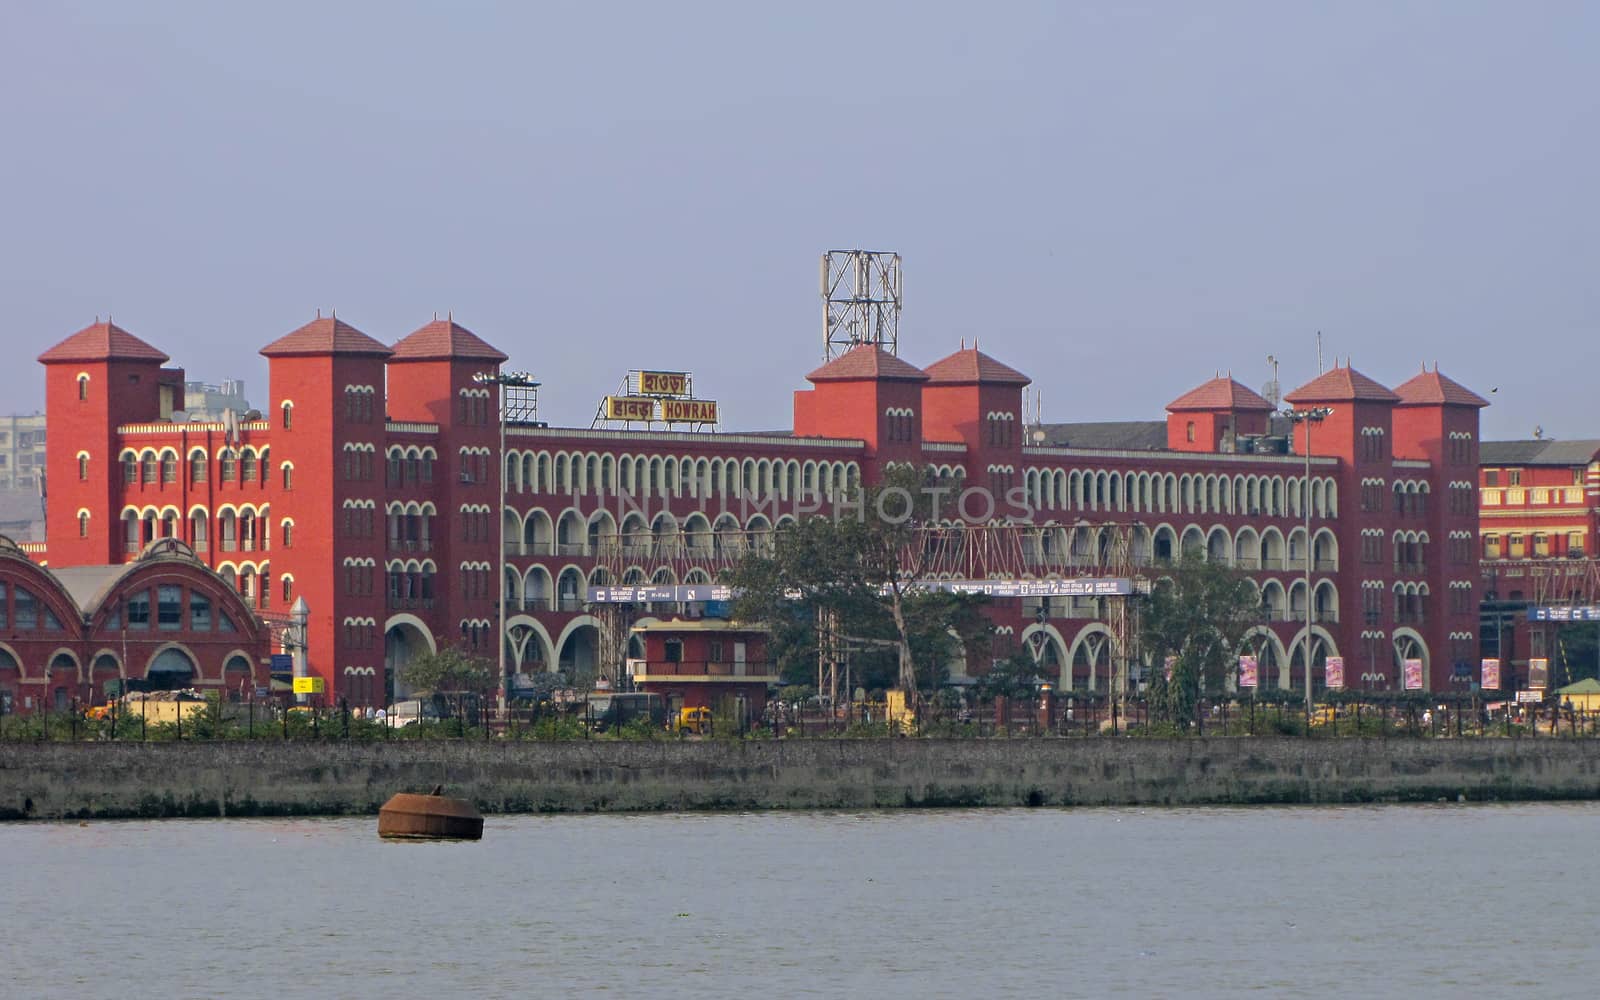 View of historical Howrah railway station building from across the Hooghly river in Kolkata.